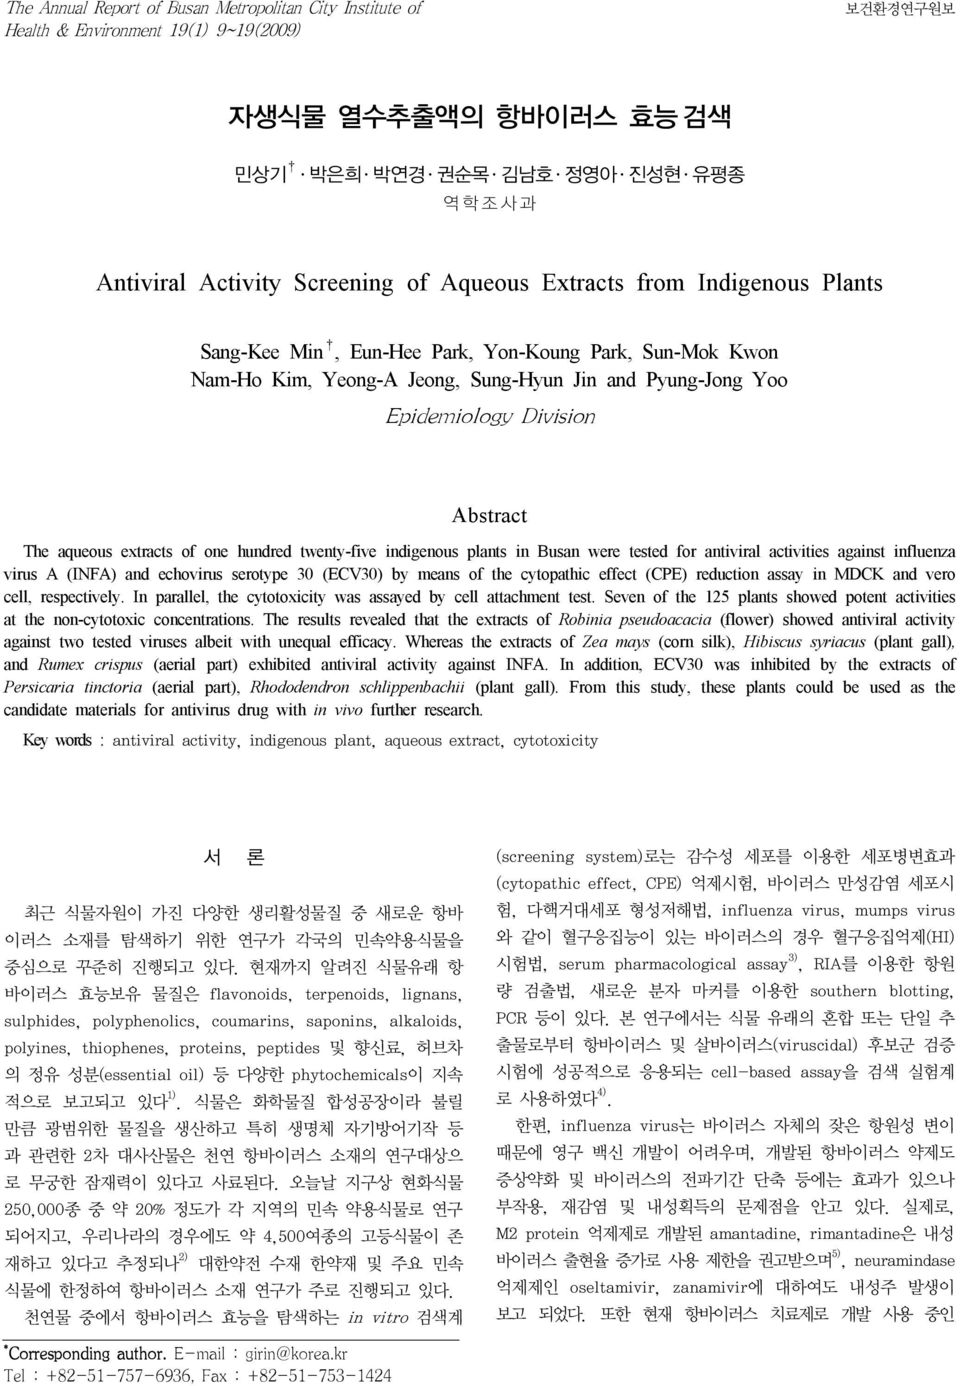 extracts of one hundred twenty-five indigenous plants in Busan were tested for antiviral activities against influenza virus A (INFA) and echovirus serotype 30 (ECV30) by means of the cytopathic